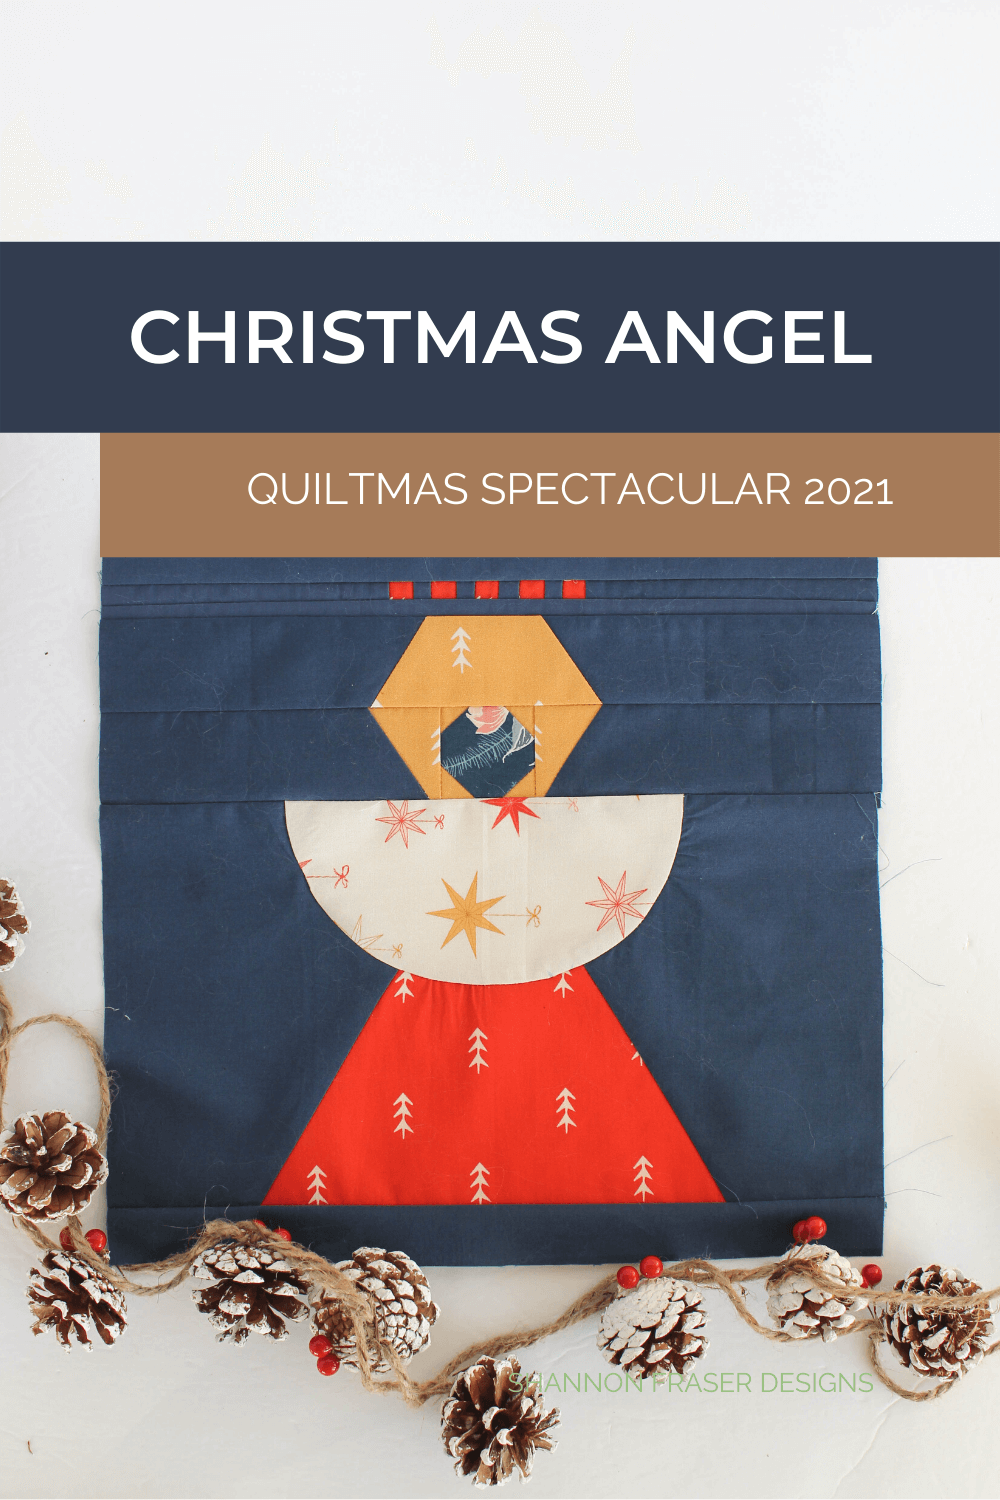 Christmas Angel Quilt Block Pattern by Shannon Fraser Designs #angelquilt